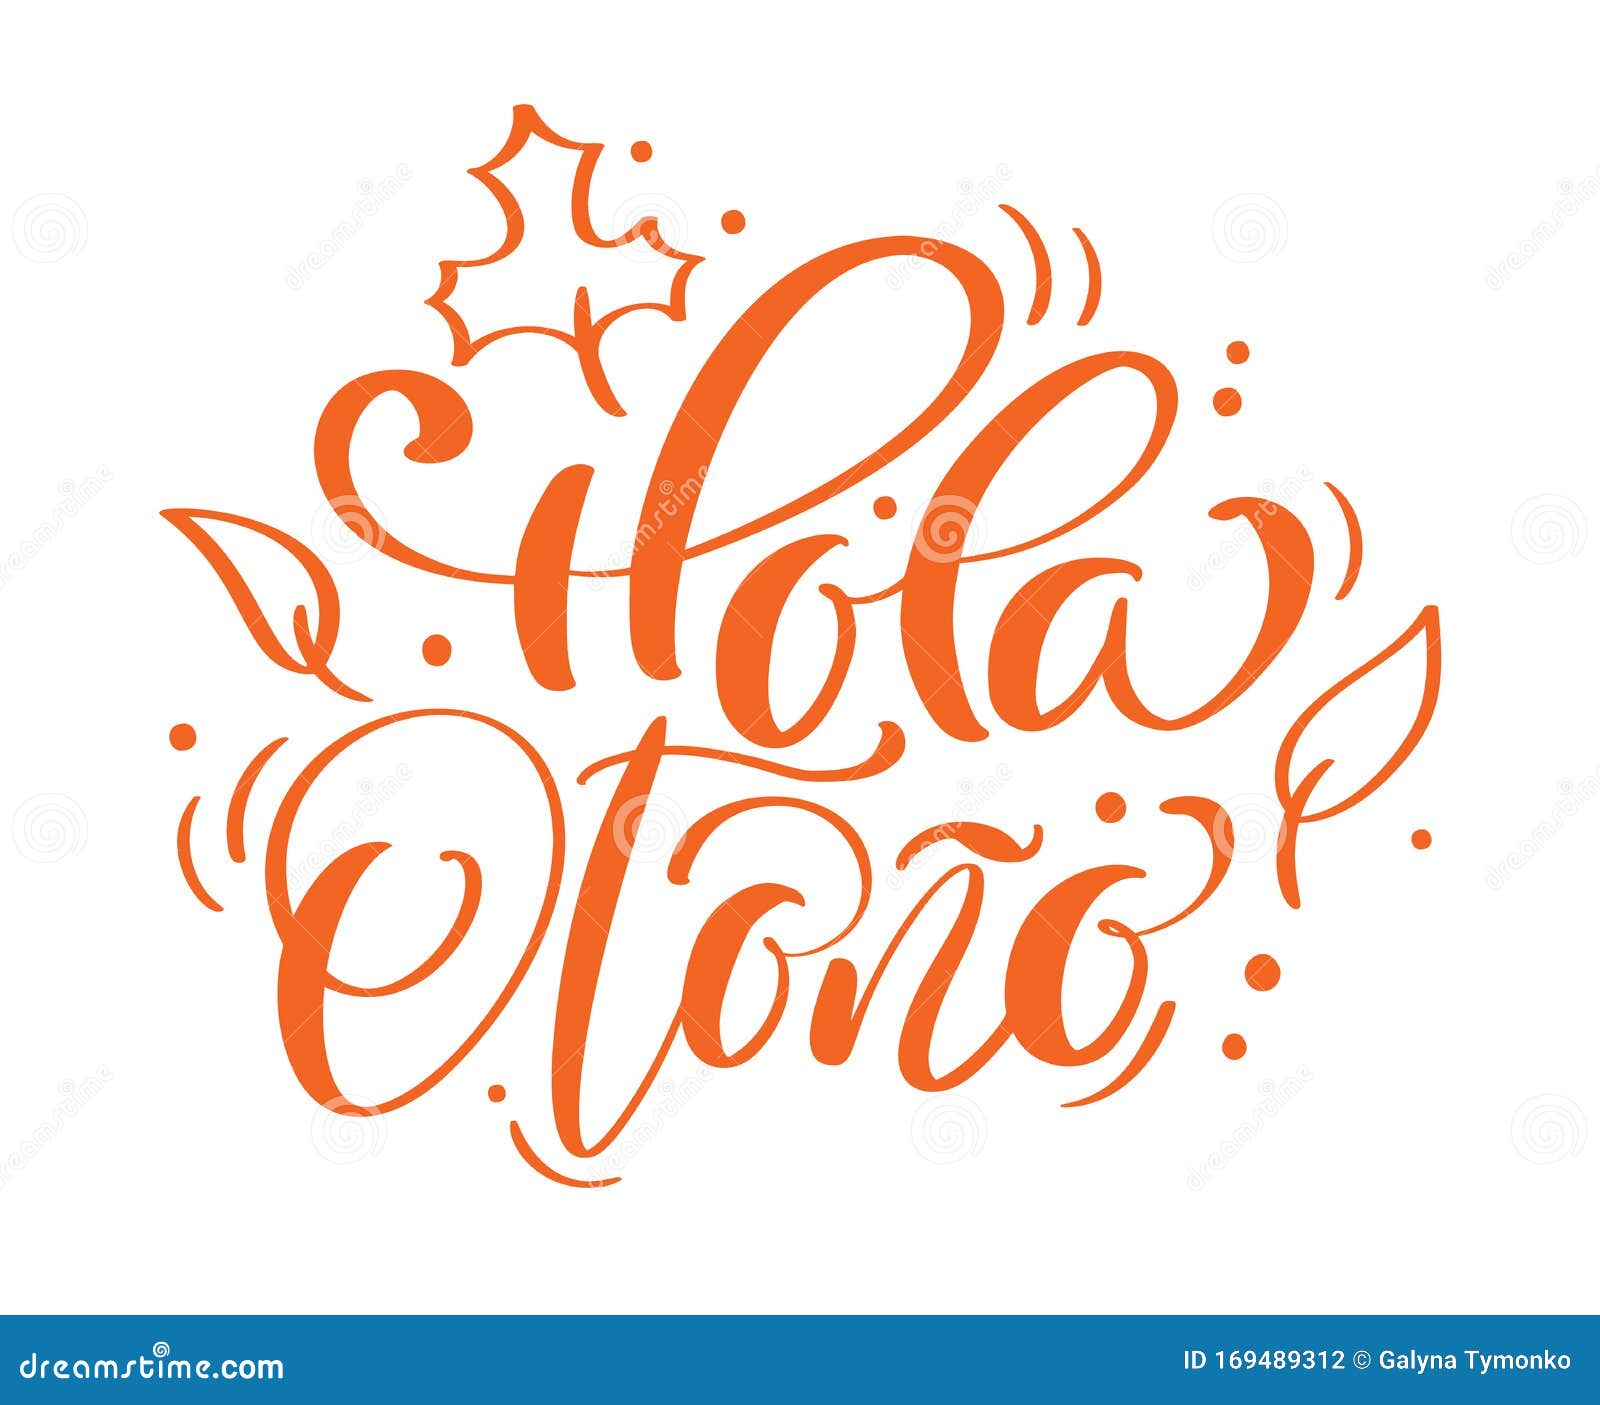 hola otono calligraphic lettering text. spanish translation hello autumn.    for flyers, banner